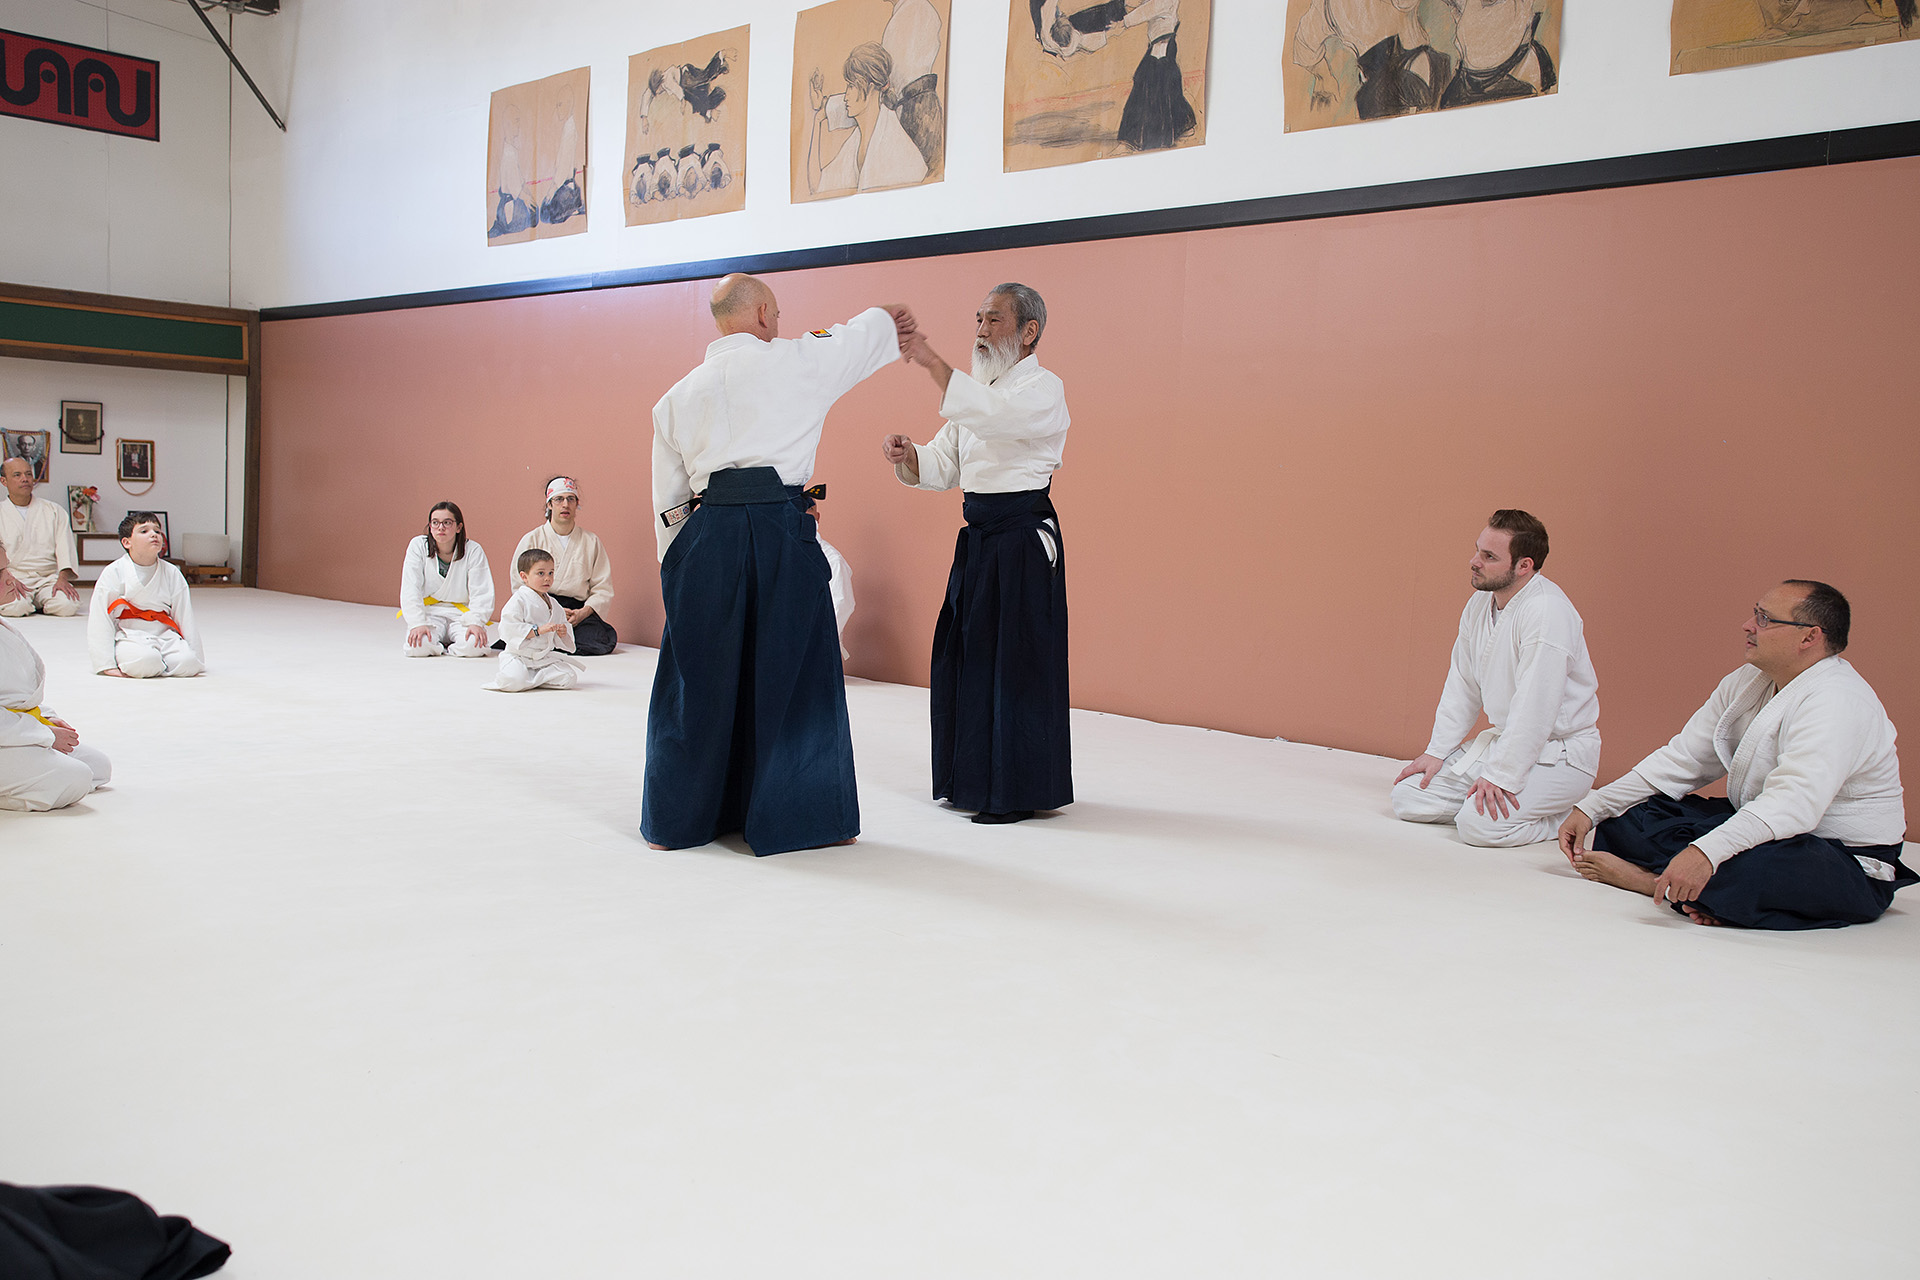 aikido is pic 5